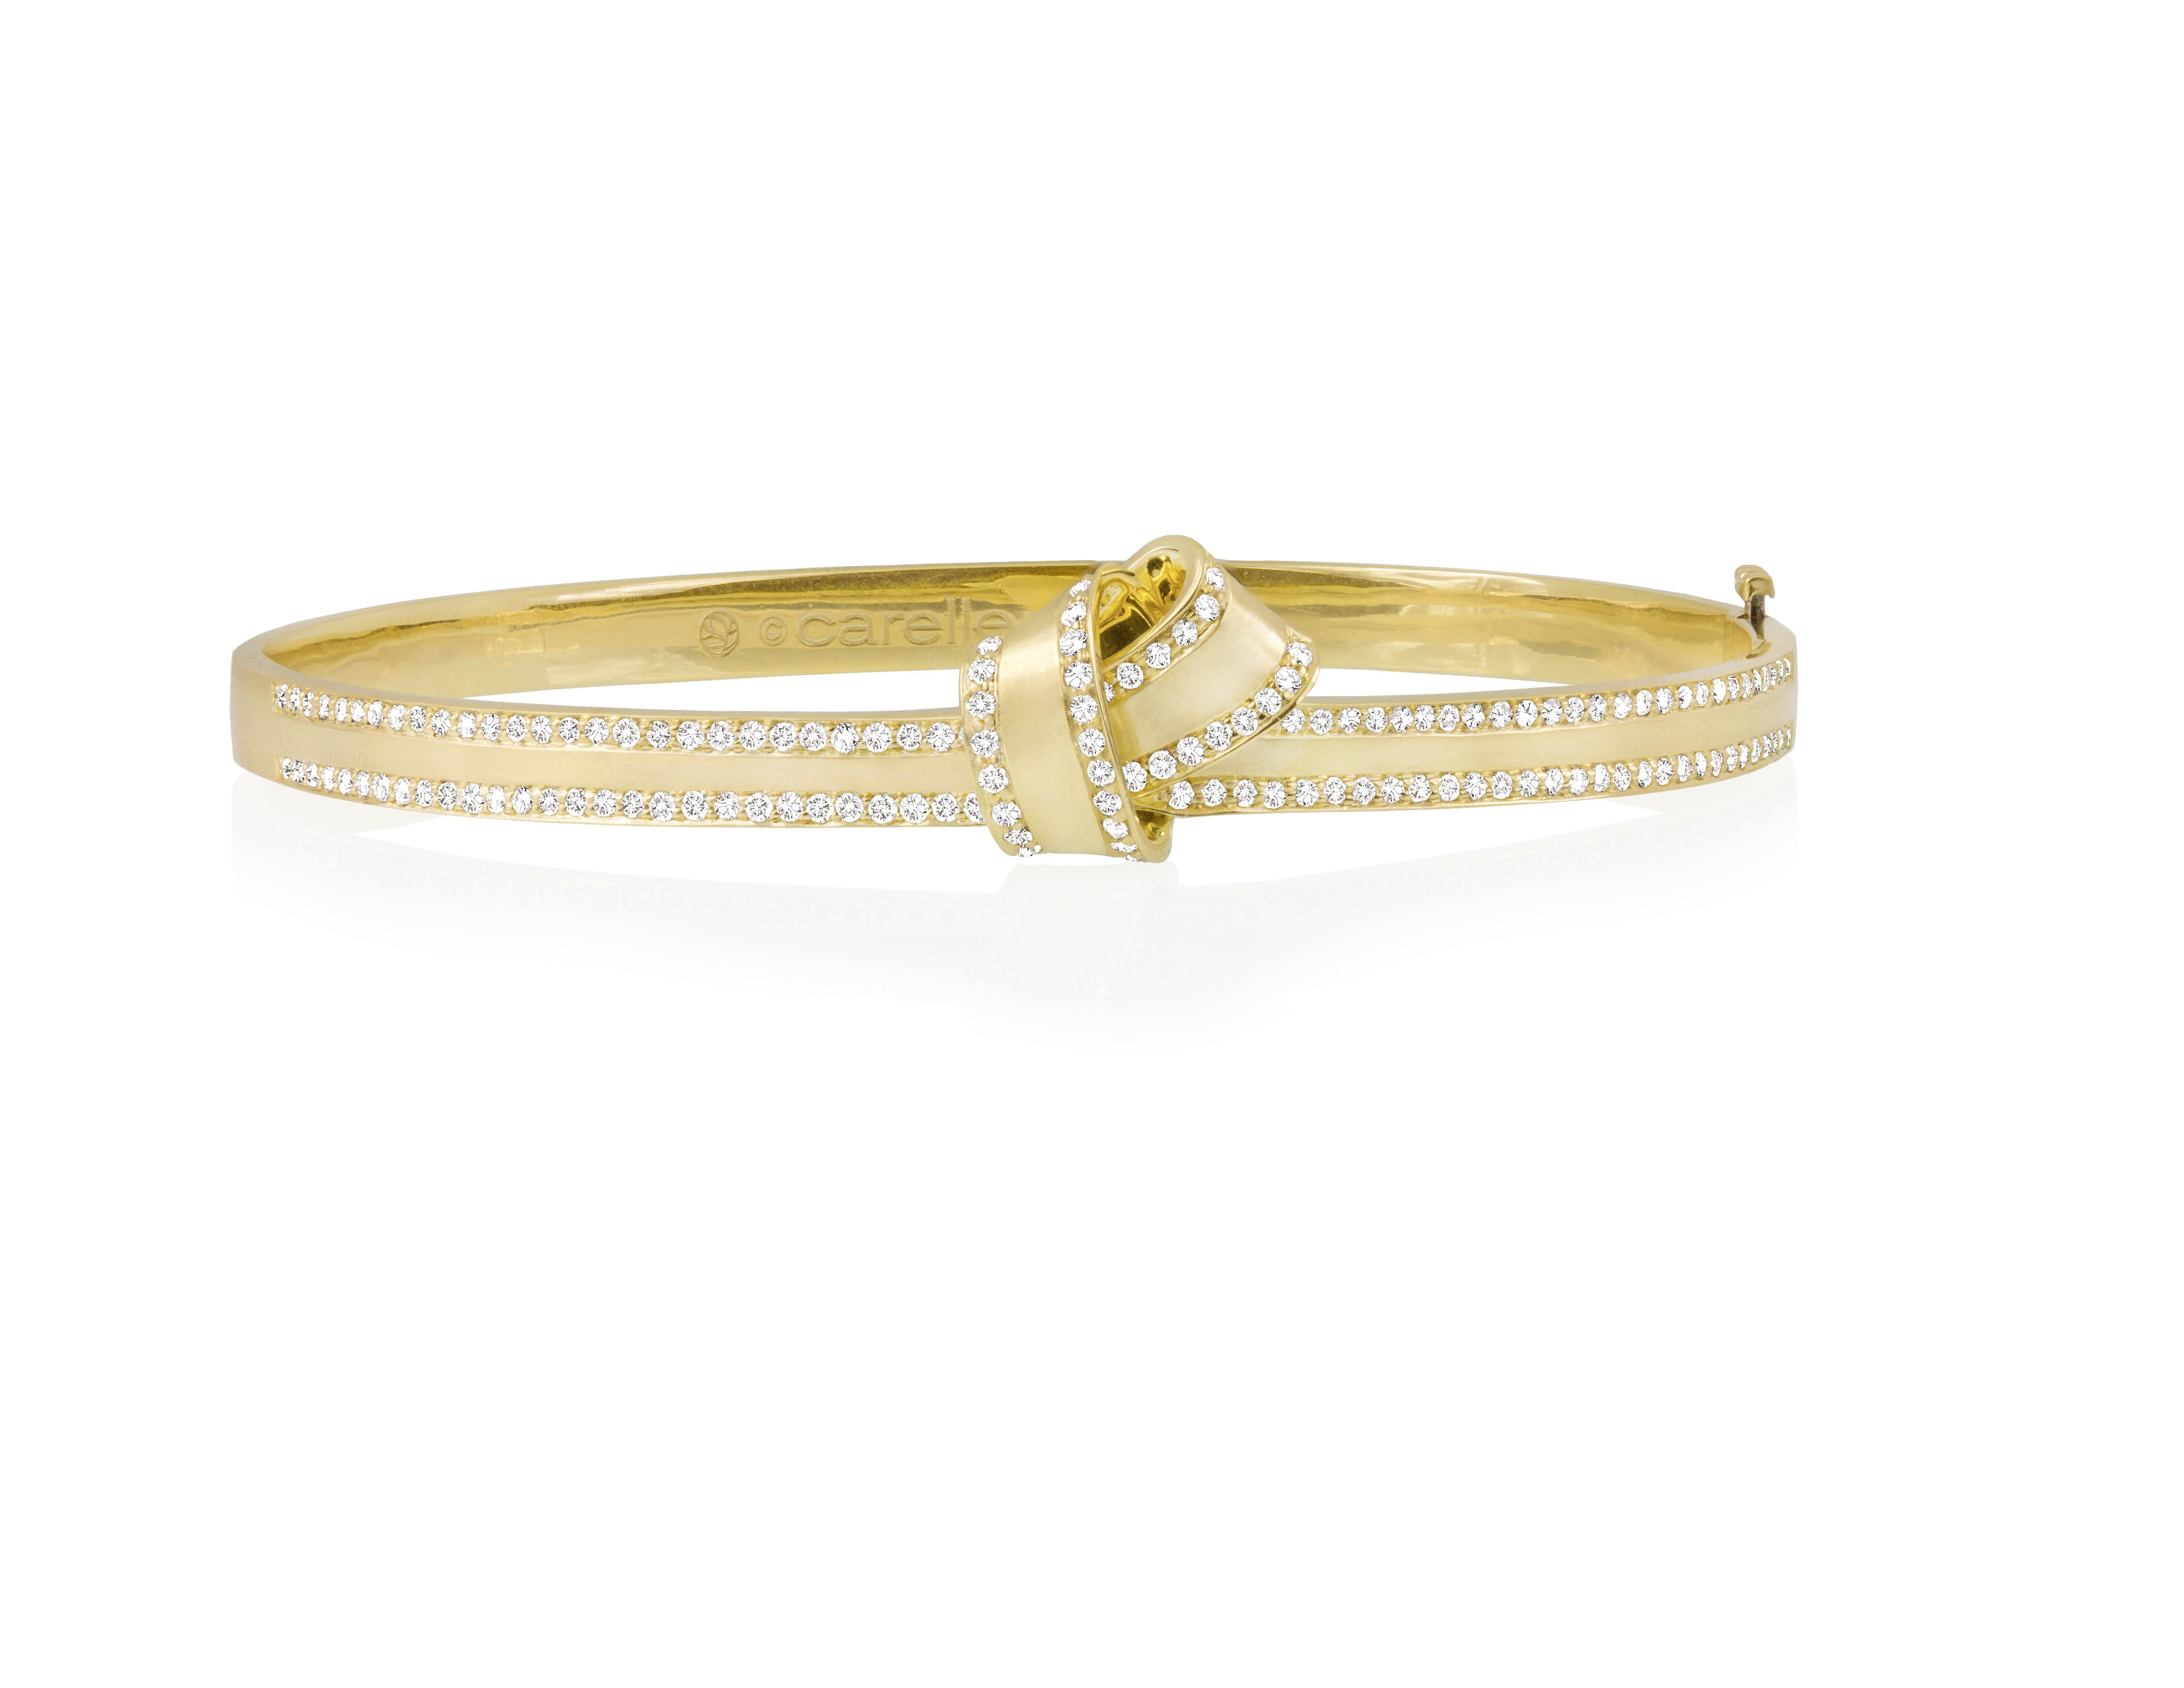 Simply stunning, these timeless designs tie together every look with a personalized touch of effortless elegance.

Outlined in sparkling pave diamond, folds of sumptuous 18k yellow gold encircle the wrist and intertwine creating a structured,